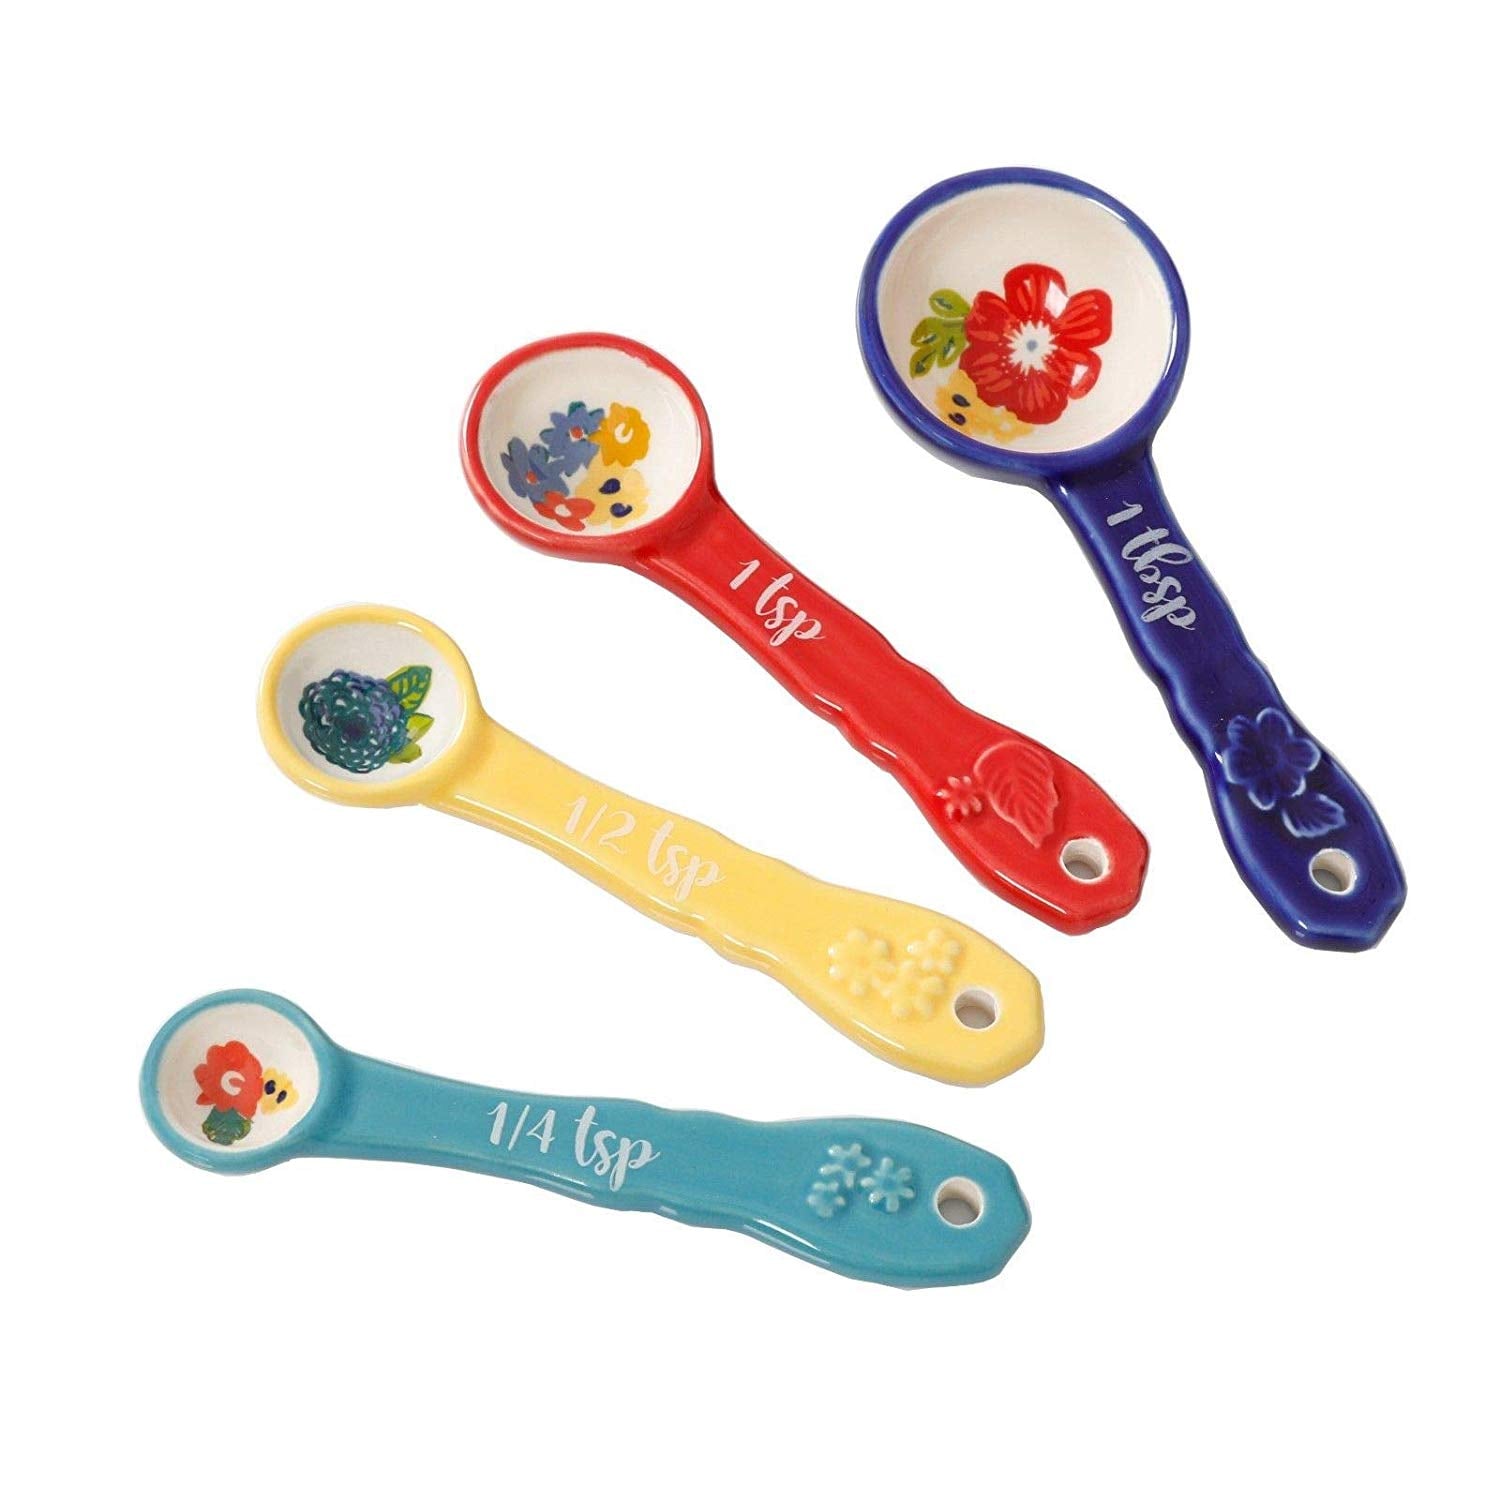 Music Note Measuring Spoon Set, cute measuring cups, measuring cups and  spoon, gift for musicians